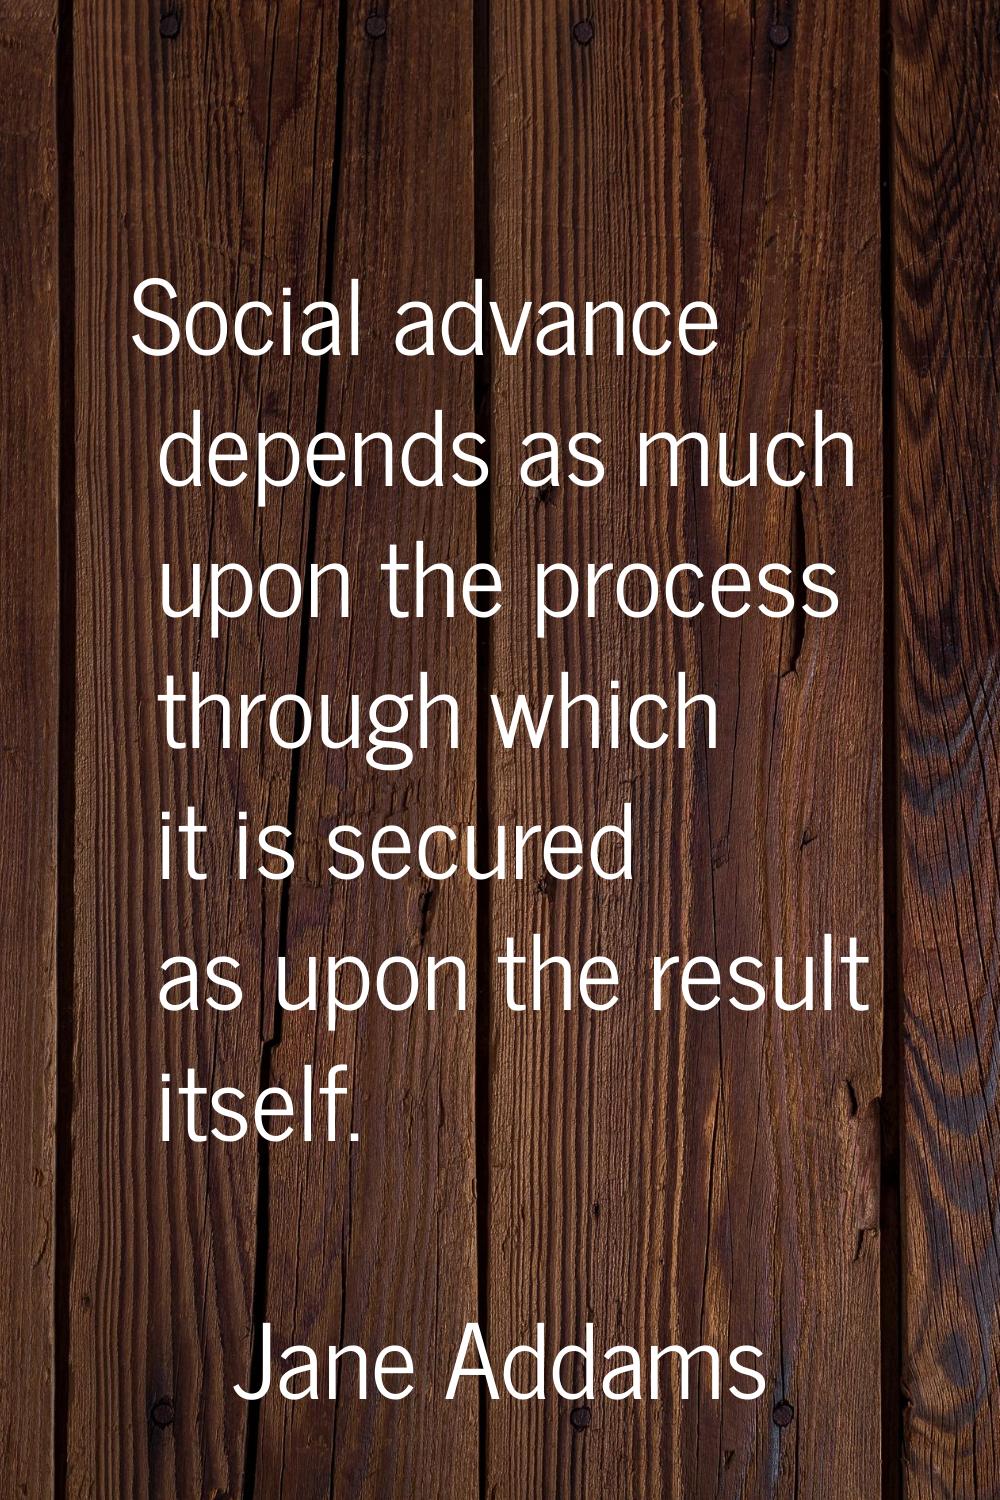 Social advance depends as much upon the process through which it is secured as upon the result itse